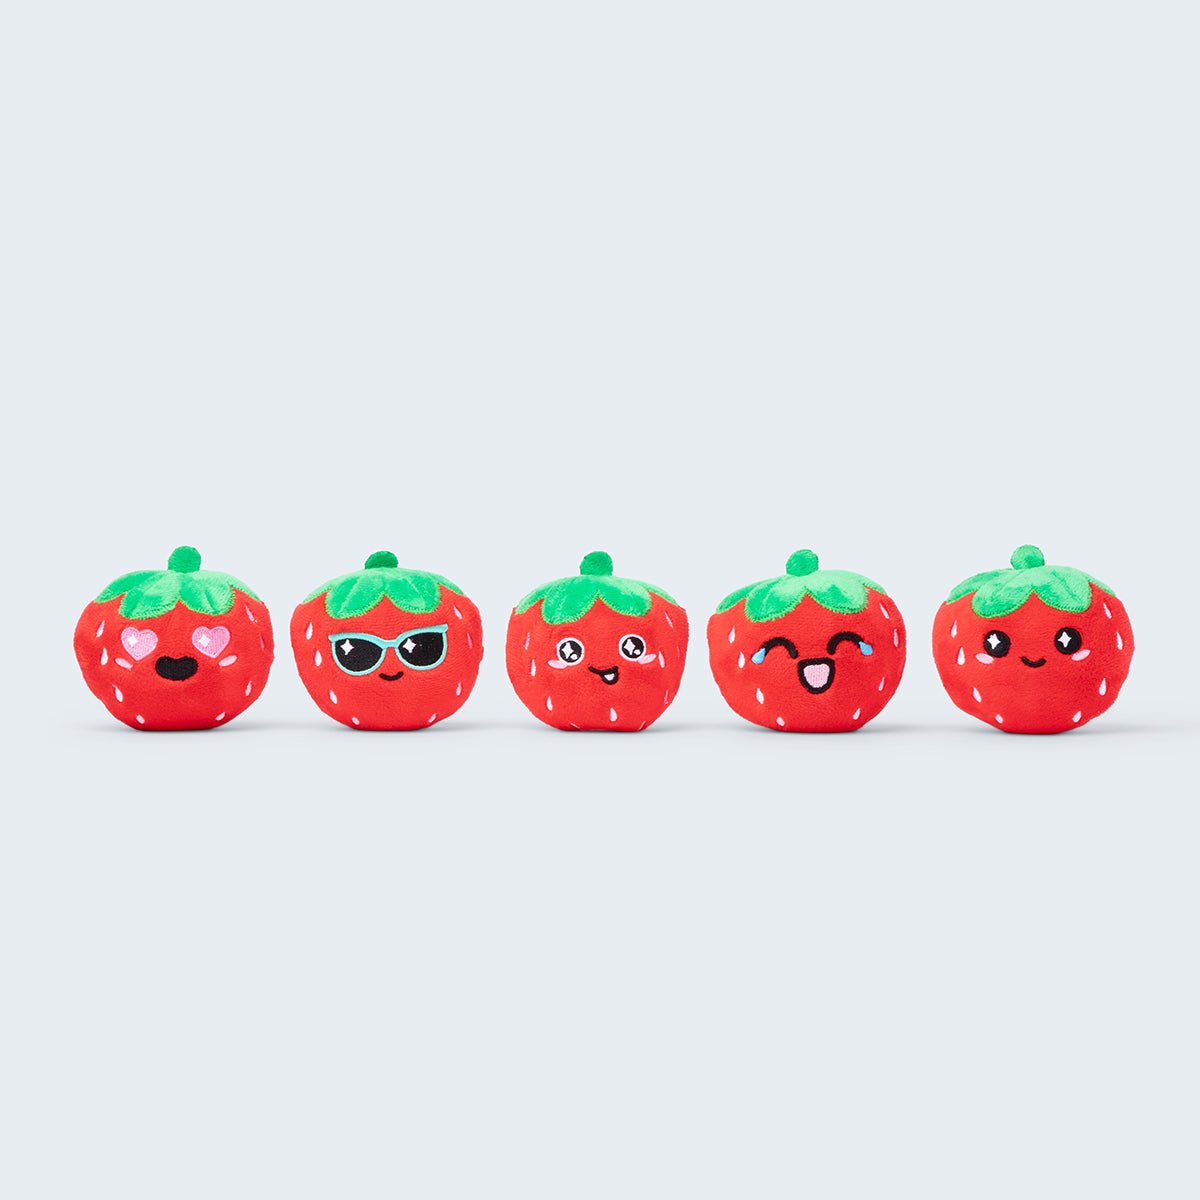 emotional support berries｜TikTok Search